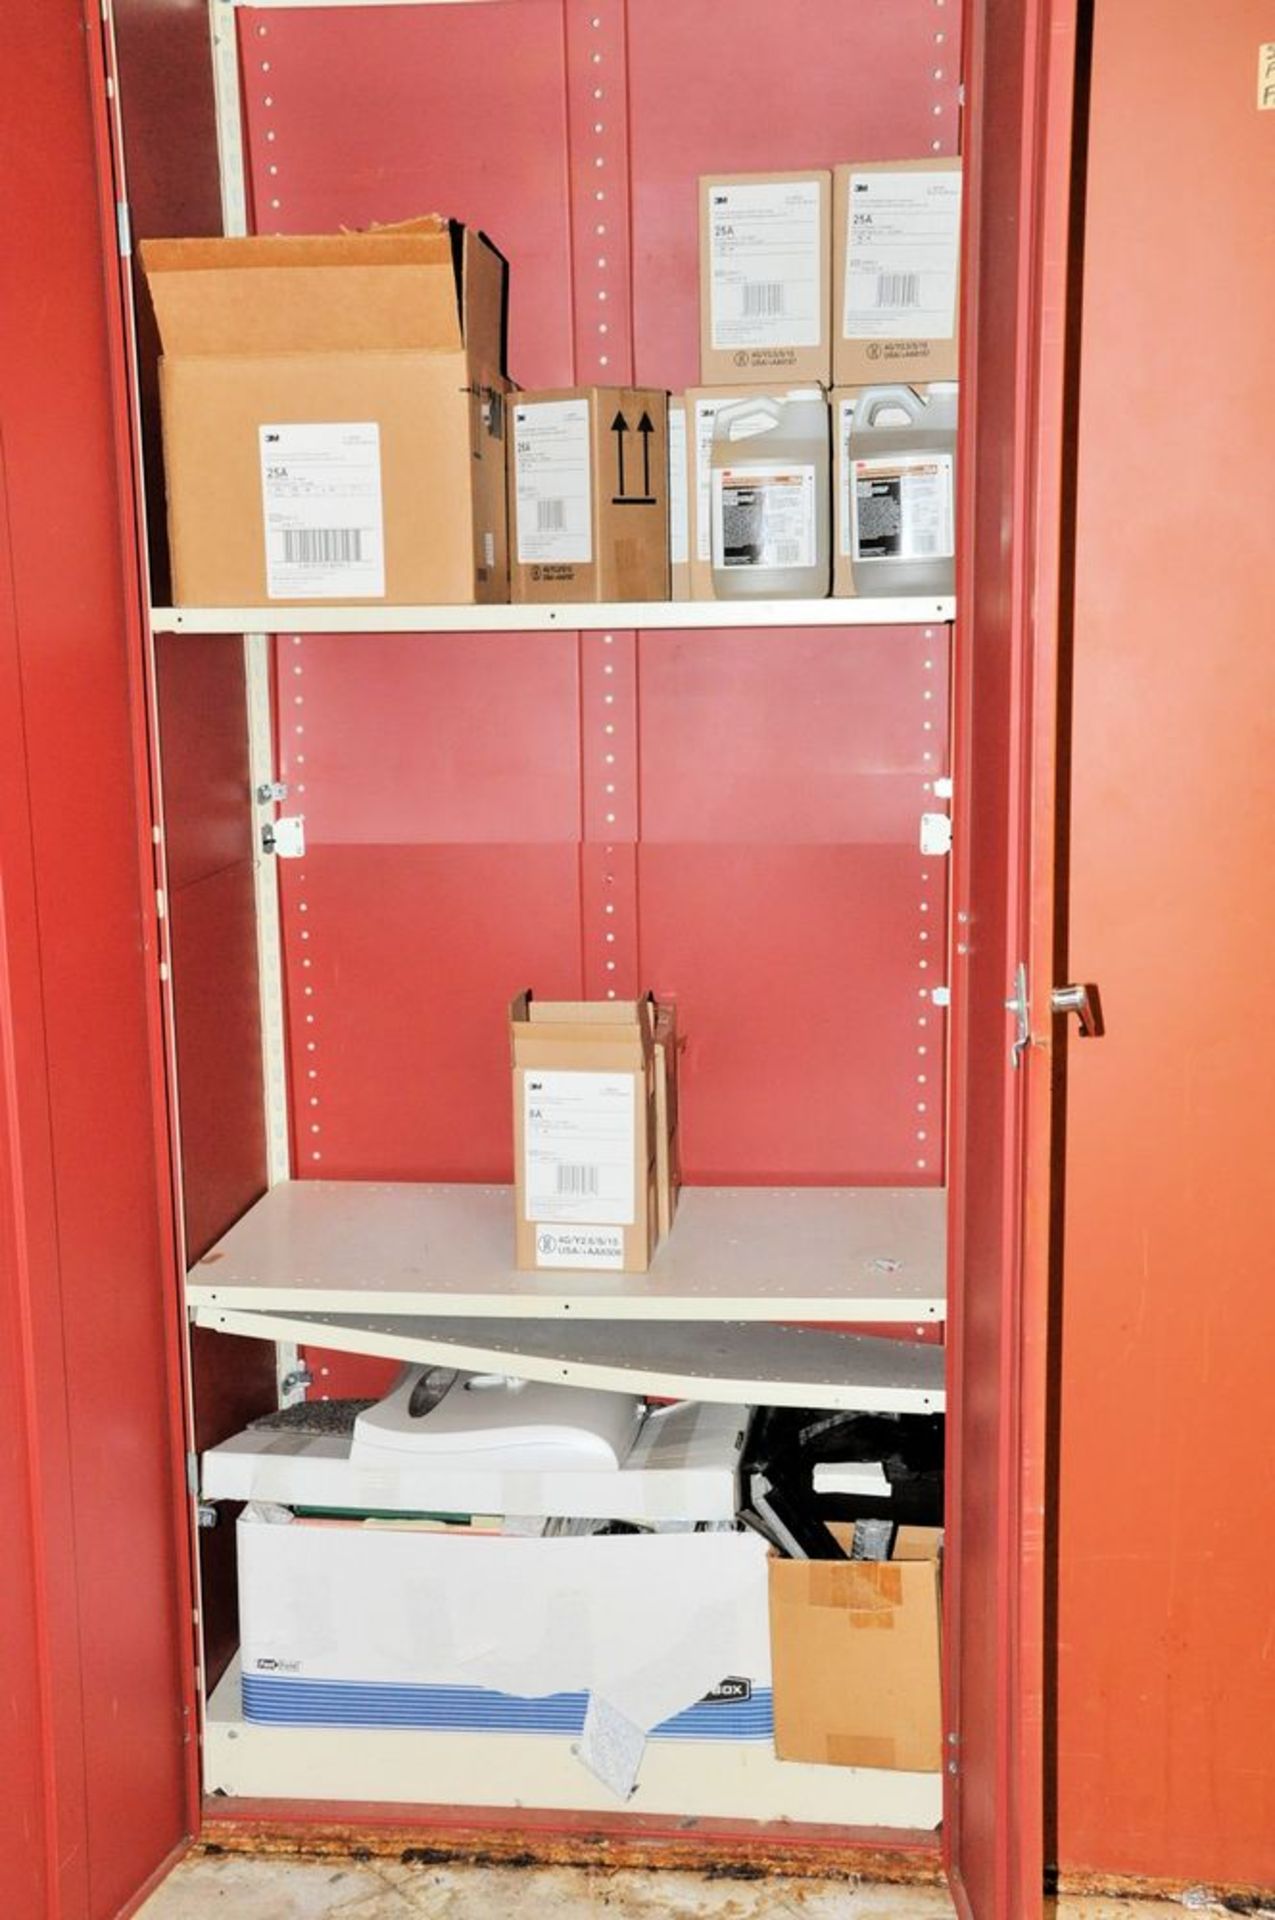 Lot-(4) 2-Door Storage Cabinets with Janitorial Supplies, (Custodial Storage), (1st Floor) - Image 2 of 5